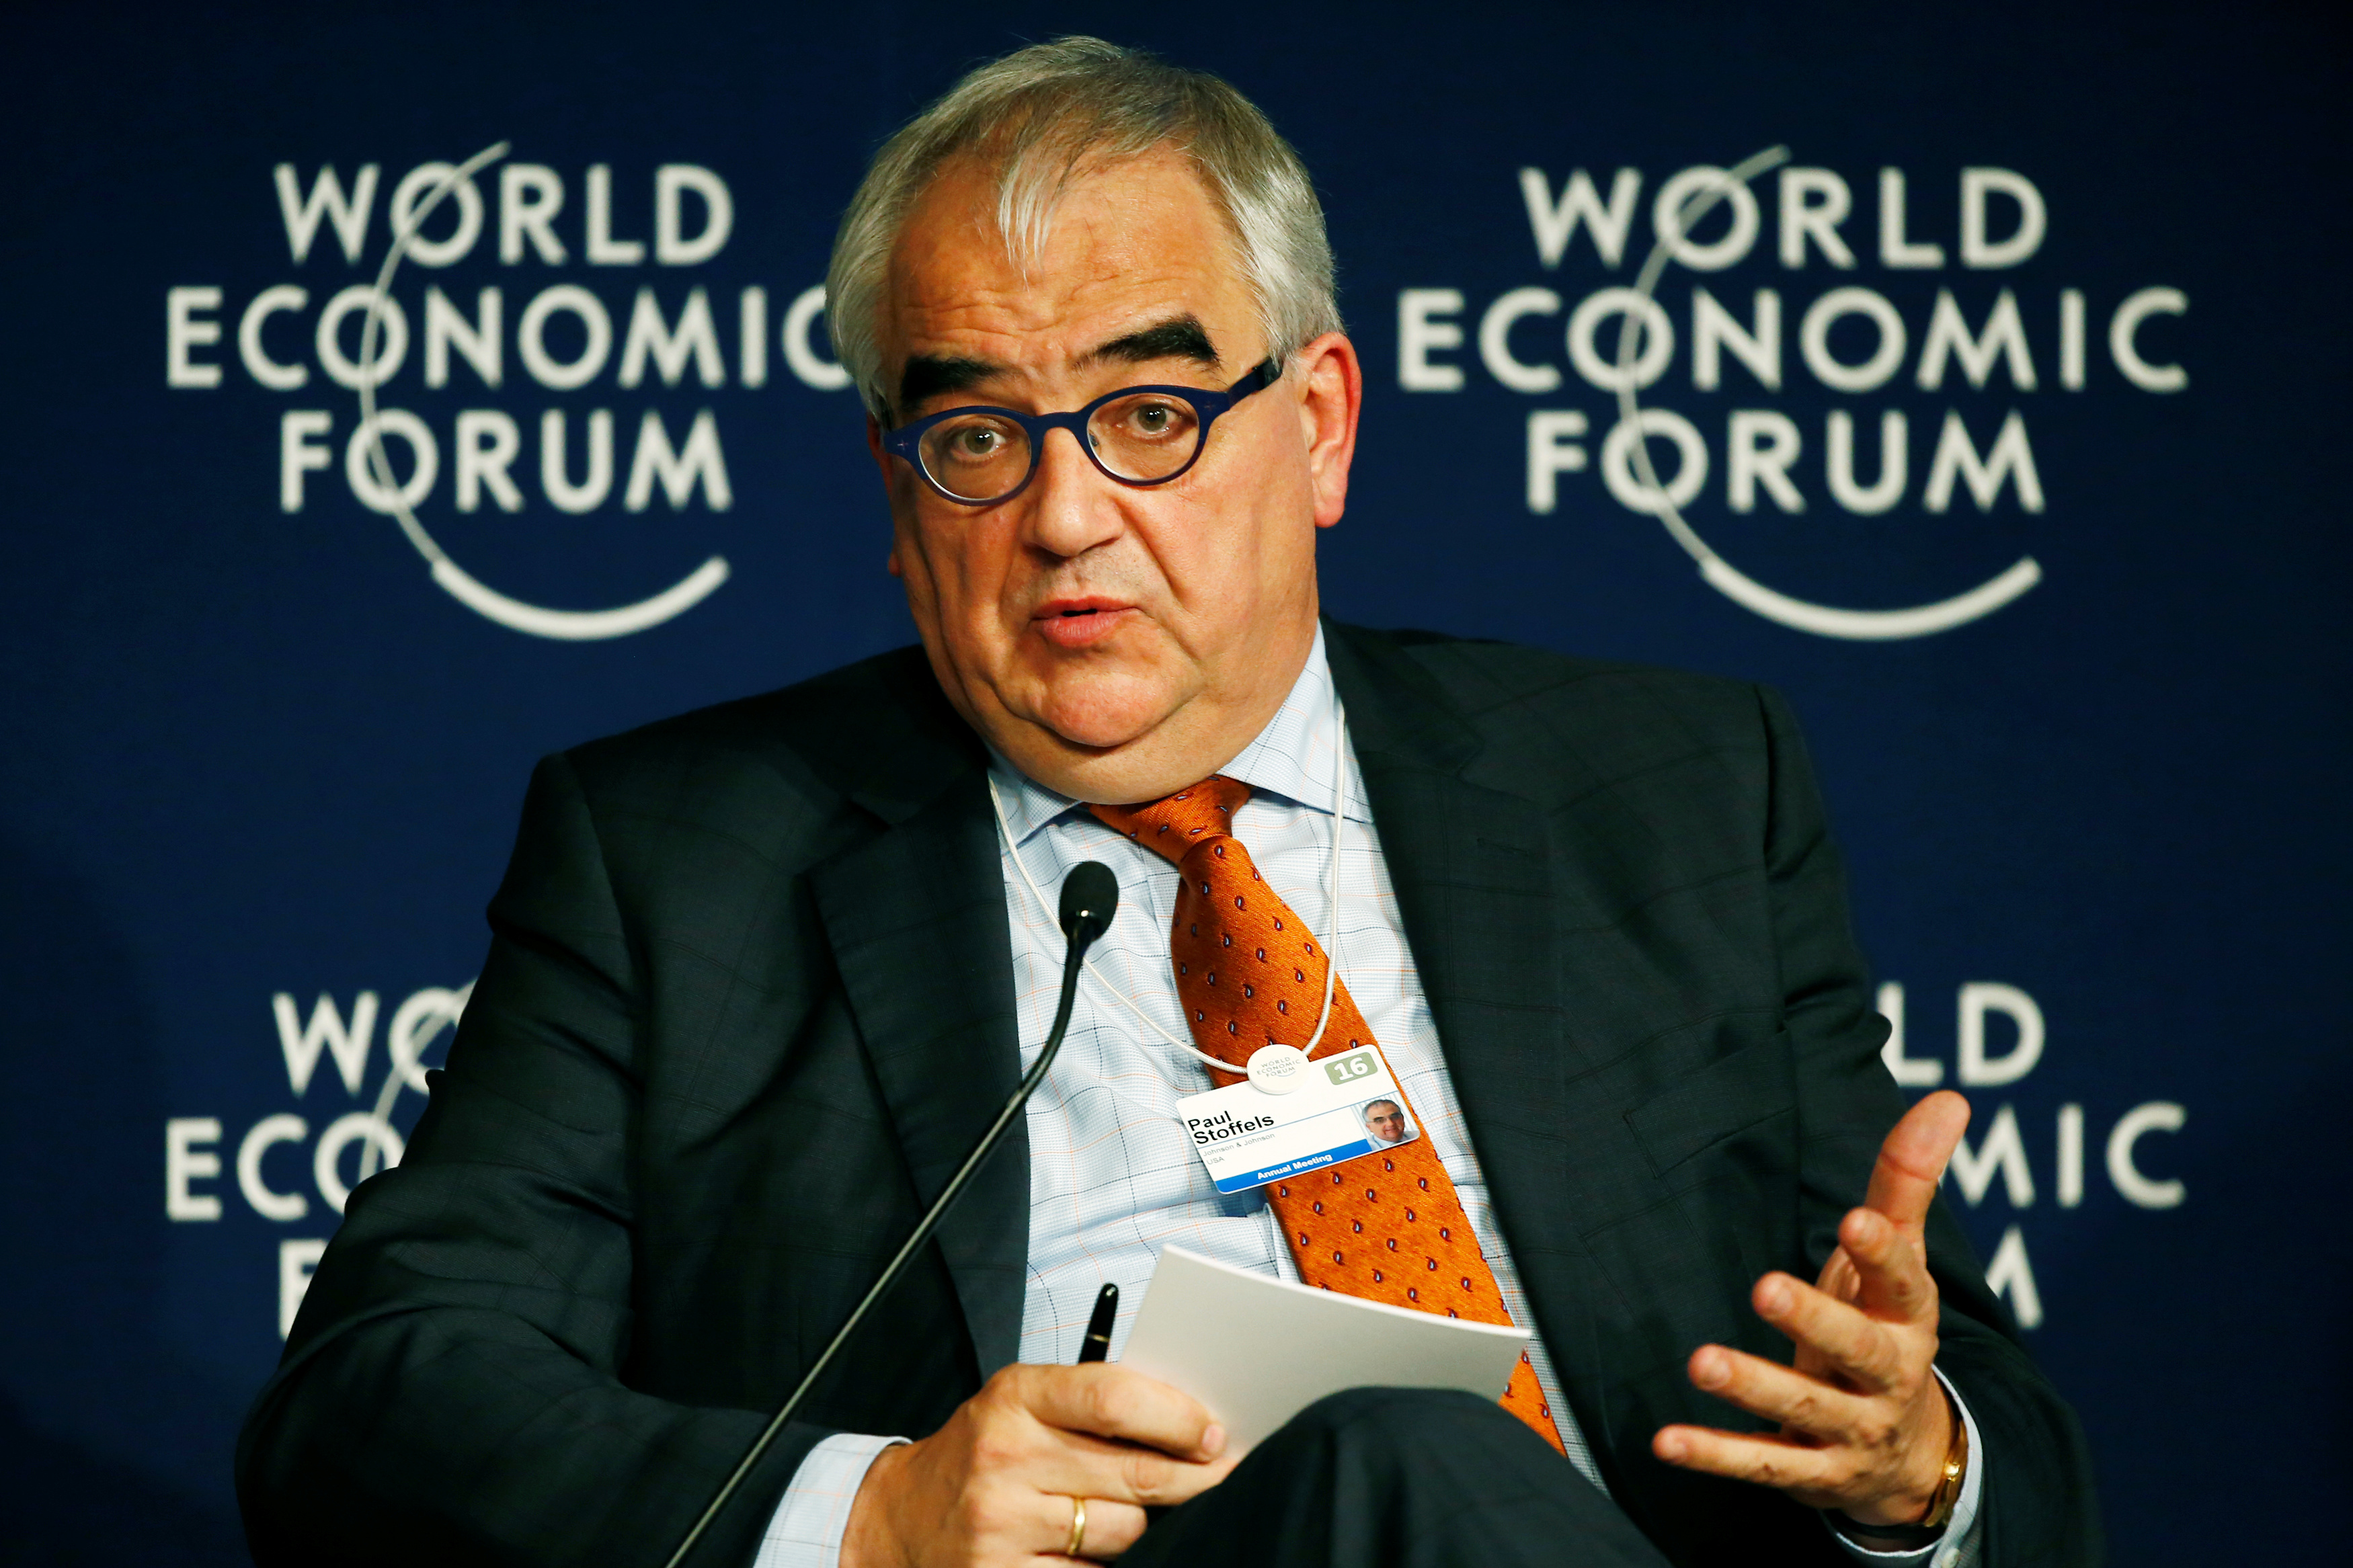 Stoffels, Chief Scientific Officer of Johnson & Johnson attends the annual meeting of the World Economic Forum (WEF) in Davos